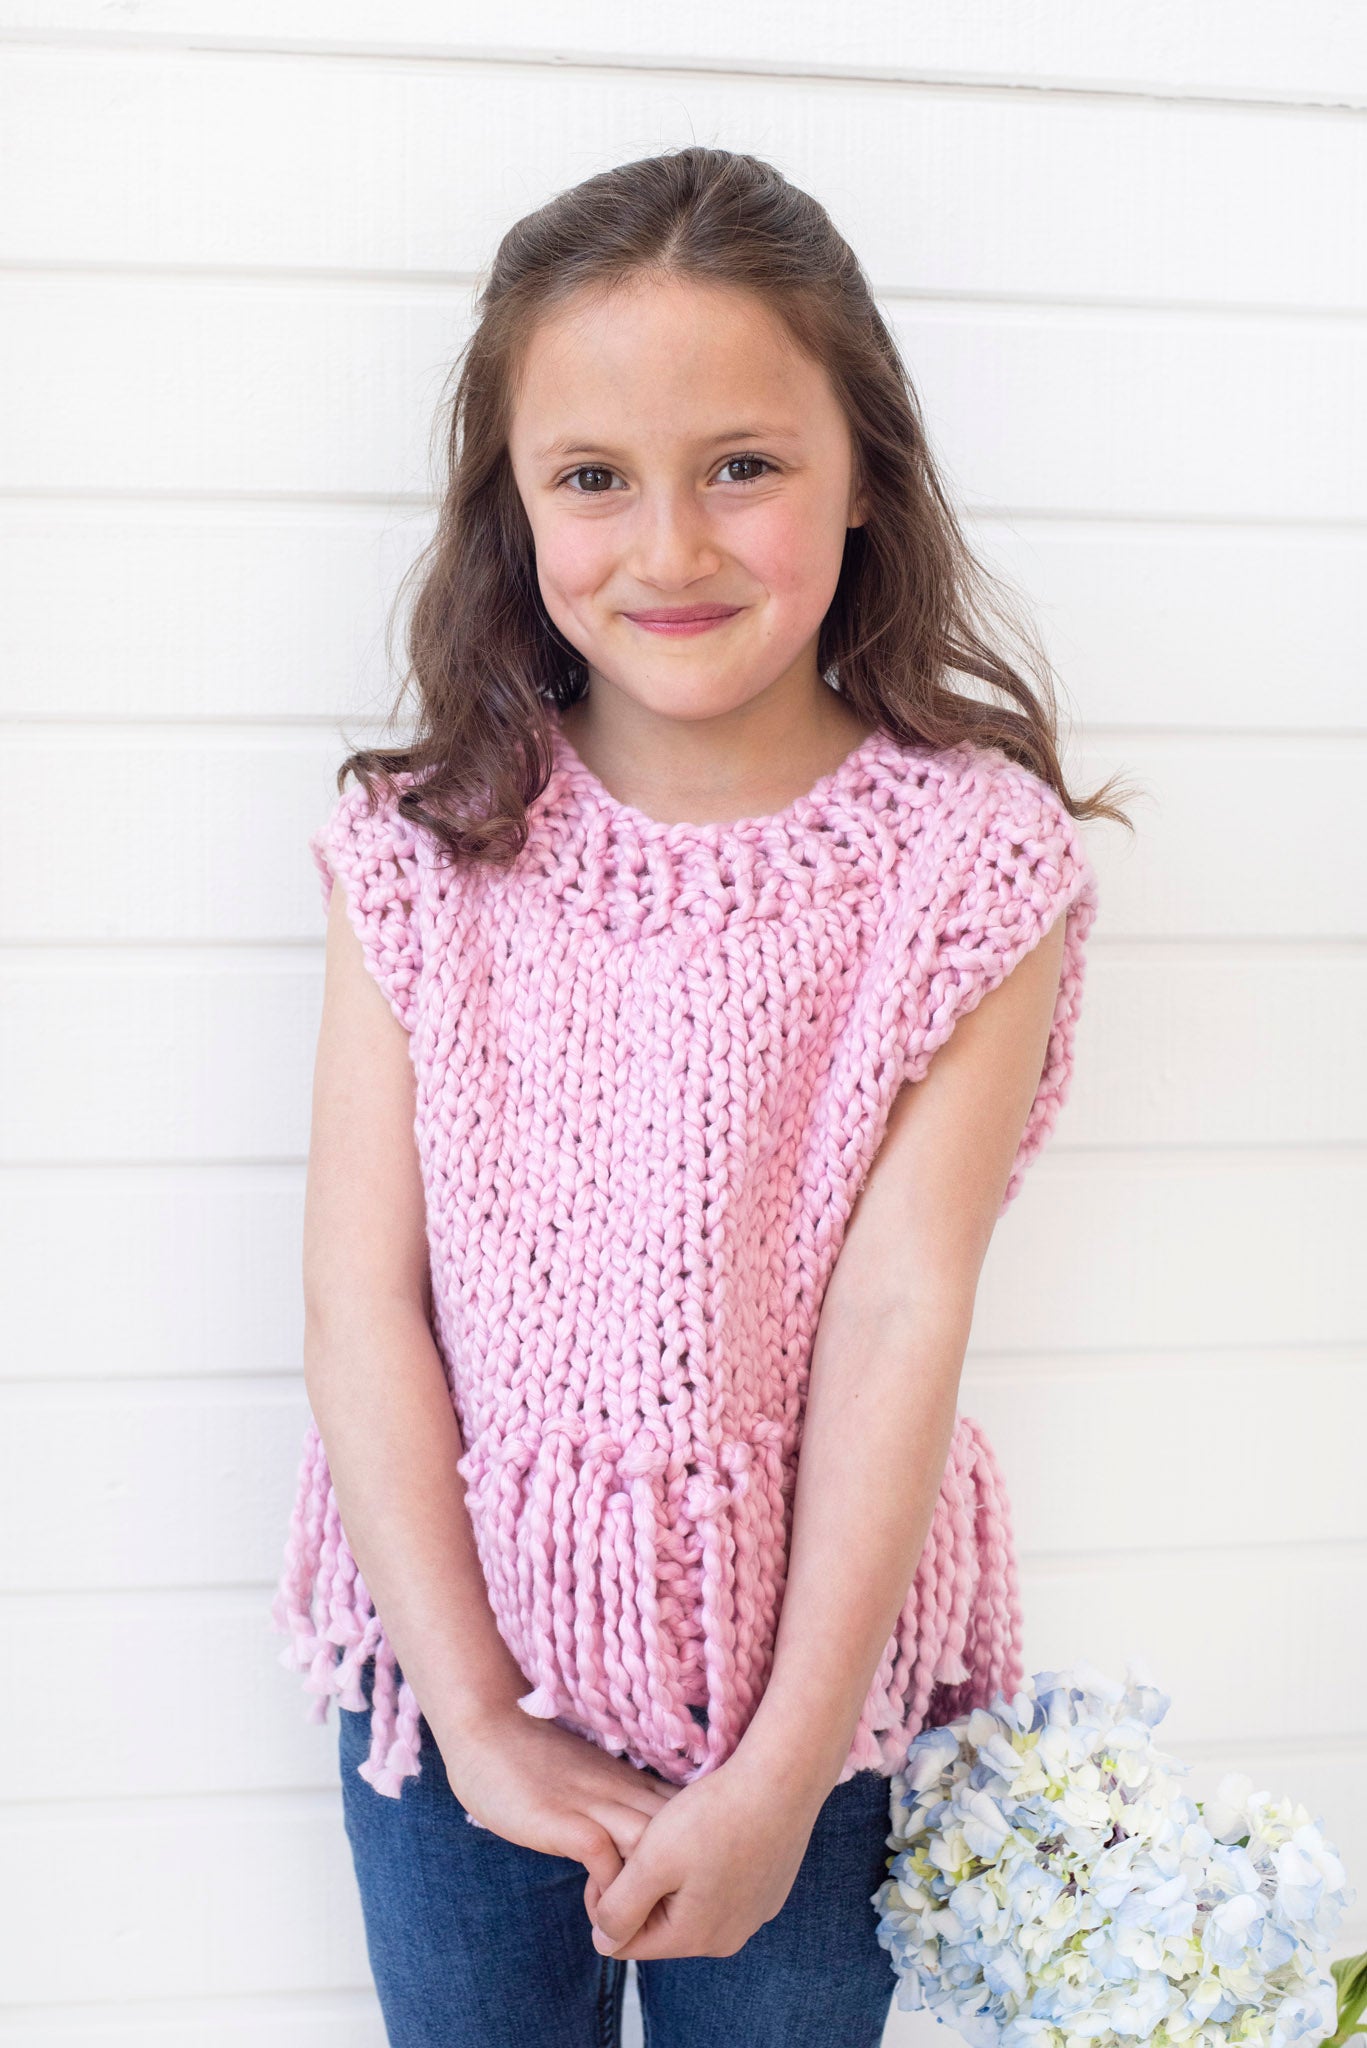 Mini Tank Top with and without Fringe PATTERN- Big Cotton